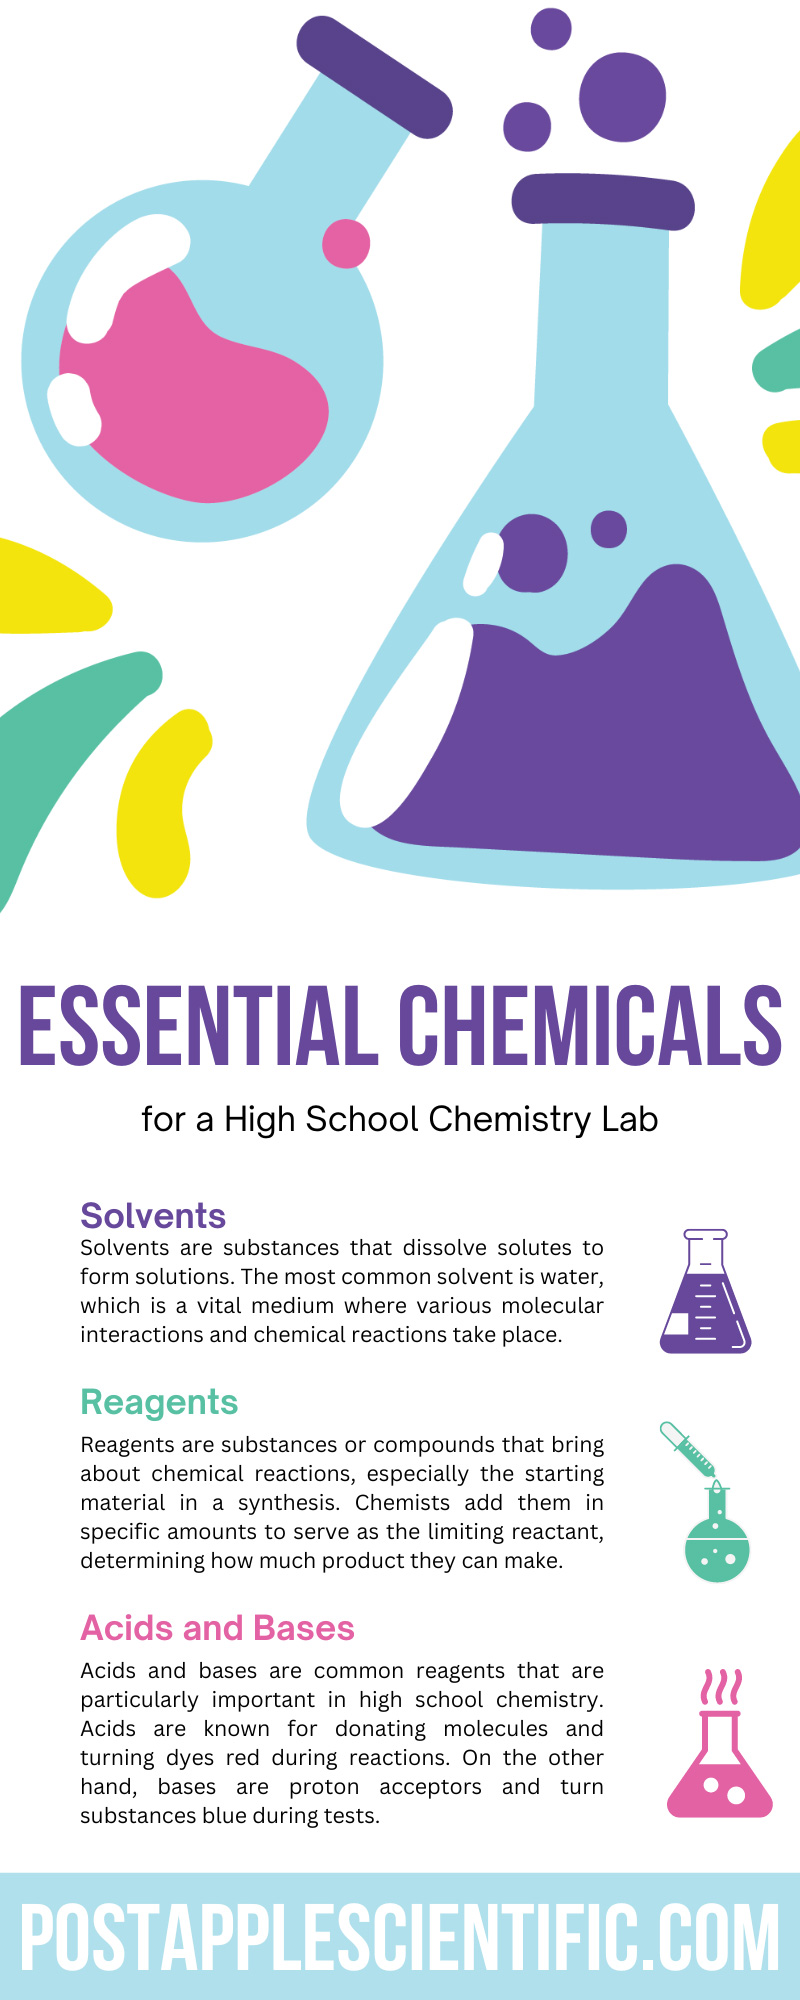 6 Essential Chemicals for a High School Chemistry Lab
